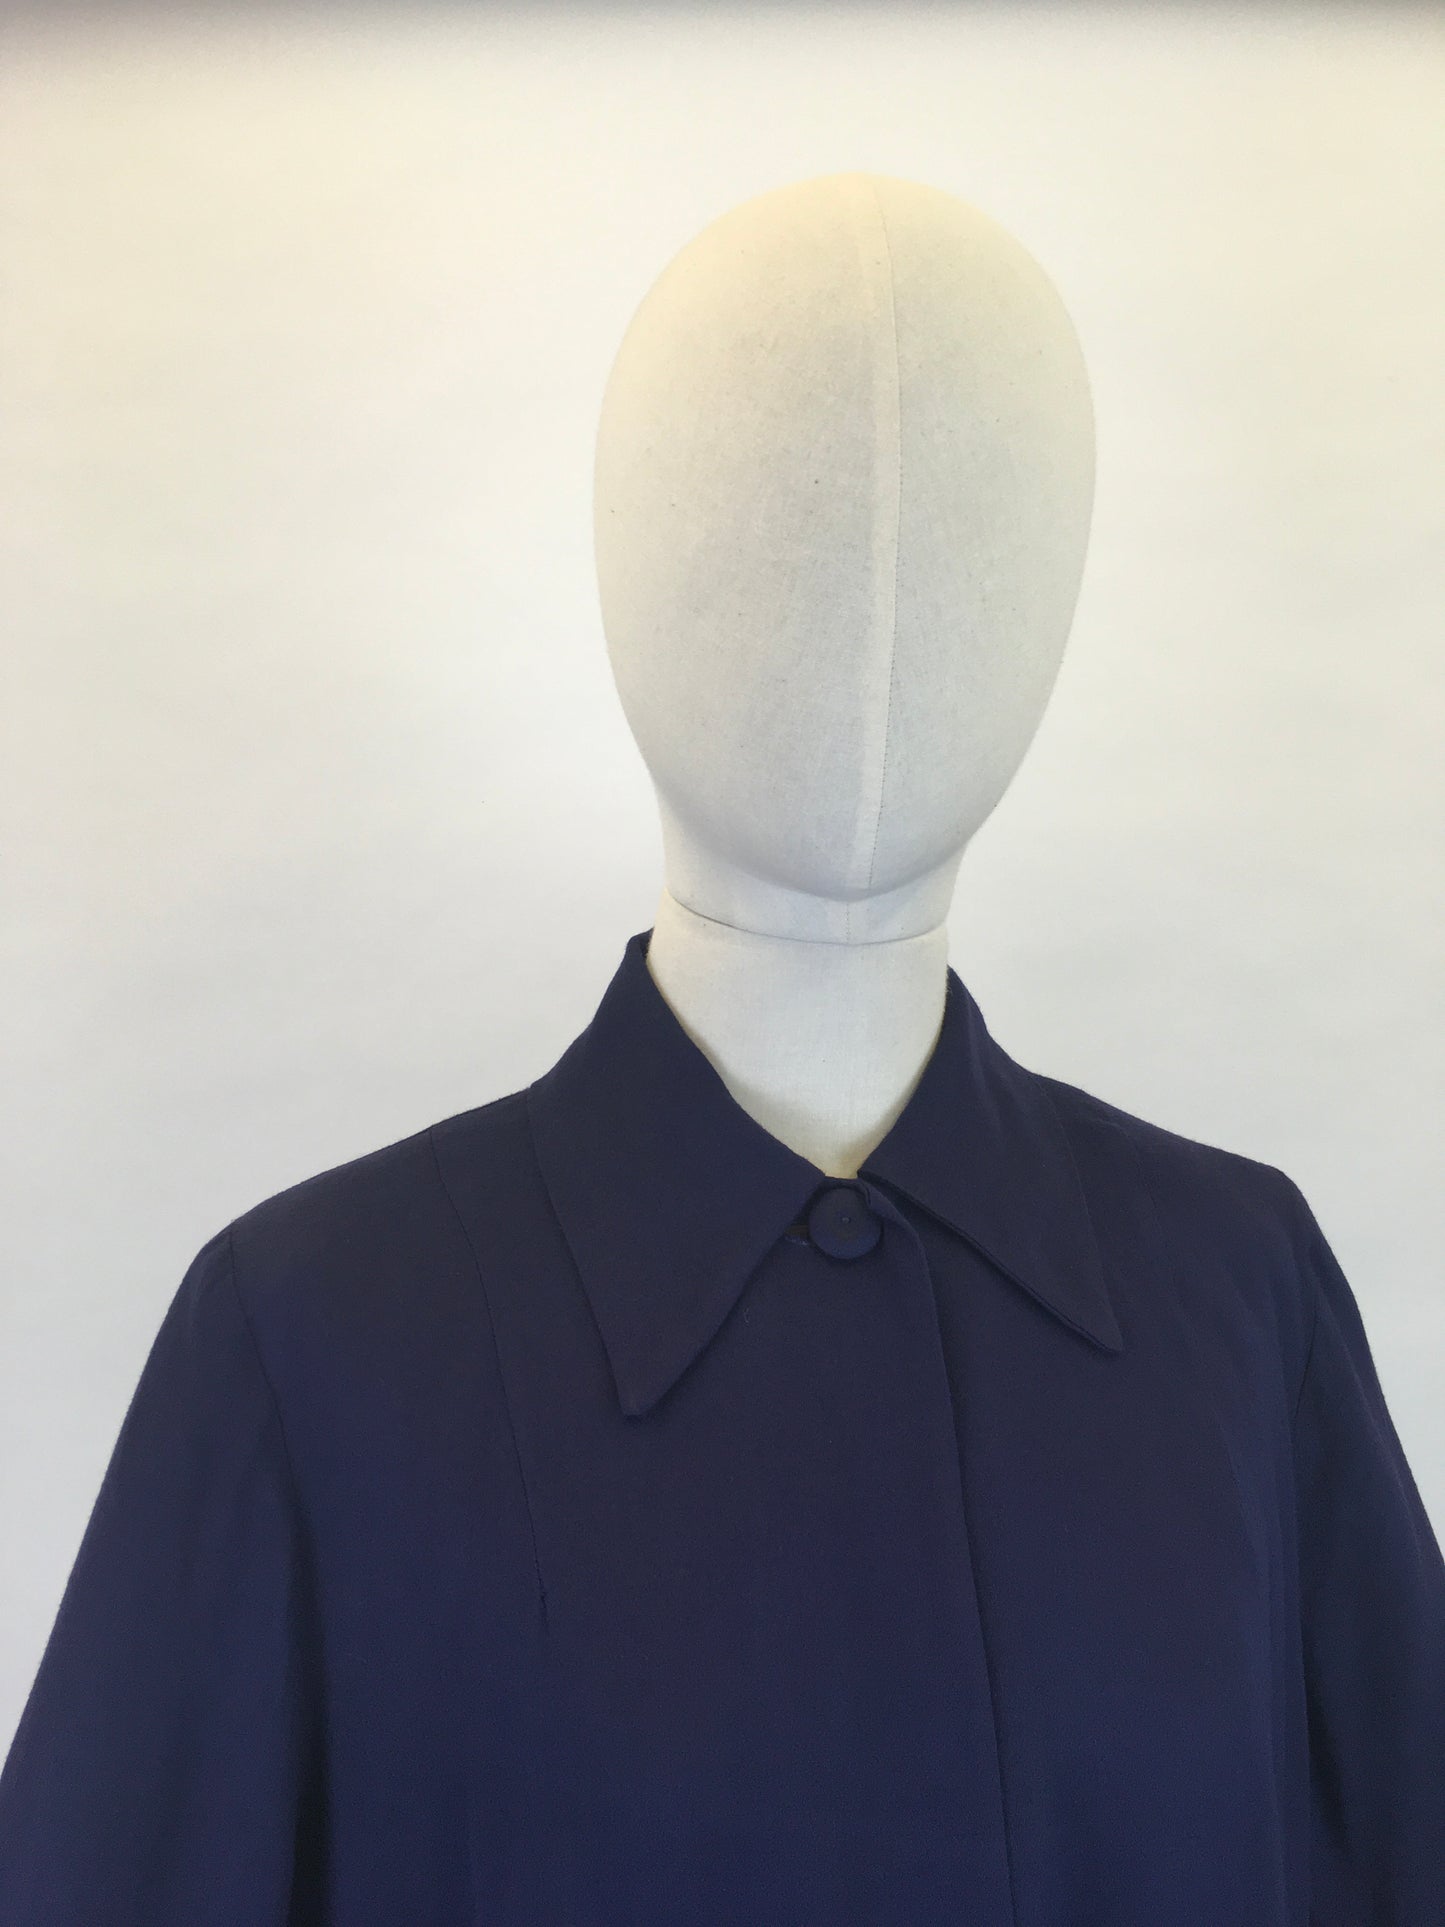 Original 1940s Stunning Navy Swagger Jacket - In a Lightweight Gab Fabric with lovely Button Detailing